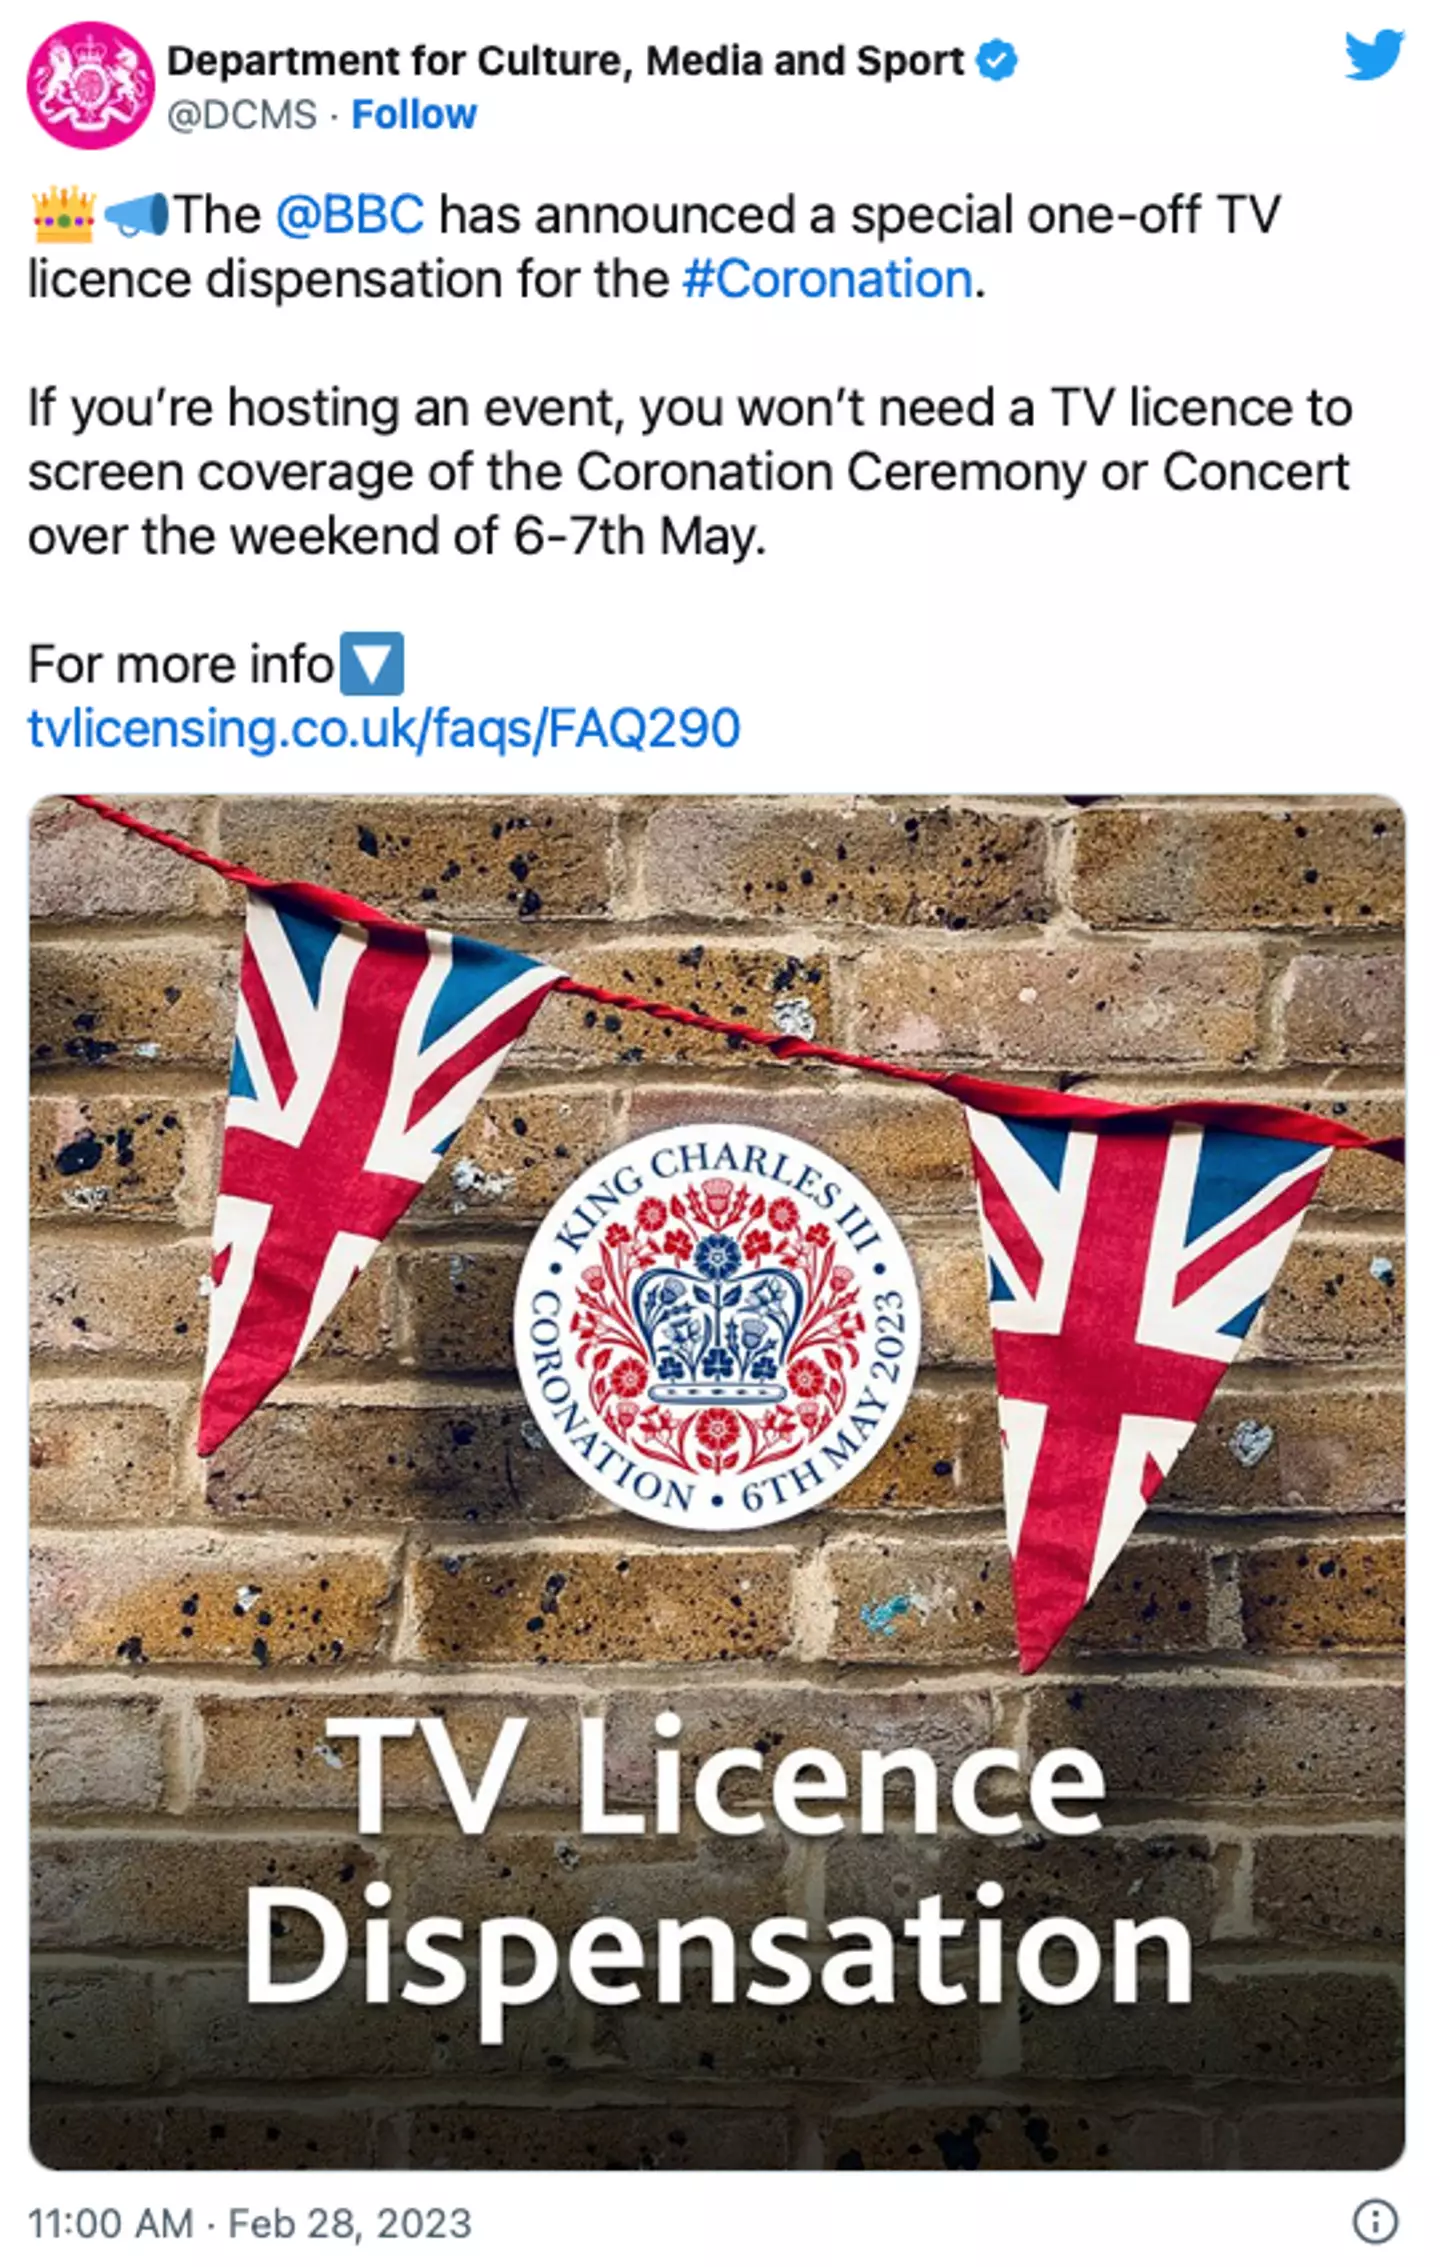 The BBC have announced that they will be allow people without a TV license to watch their coverage for one weekend only.